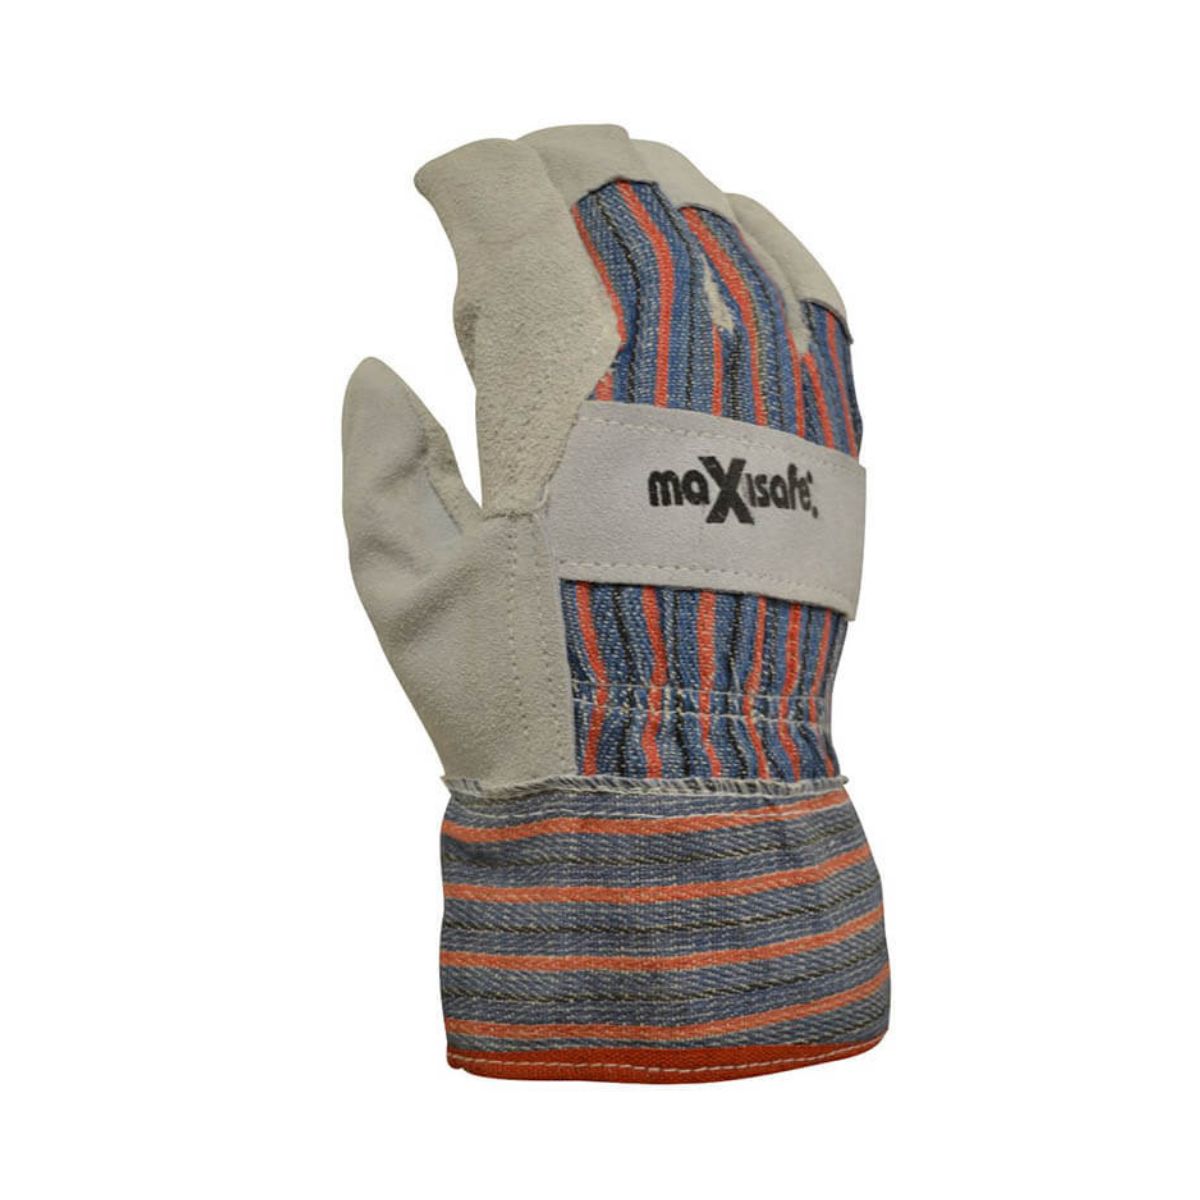 Candy Stripe Leather Glove GLC145 (Pack of 12 pairs)